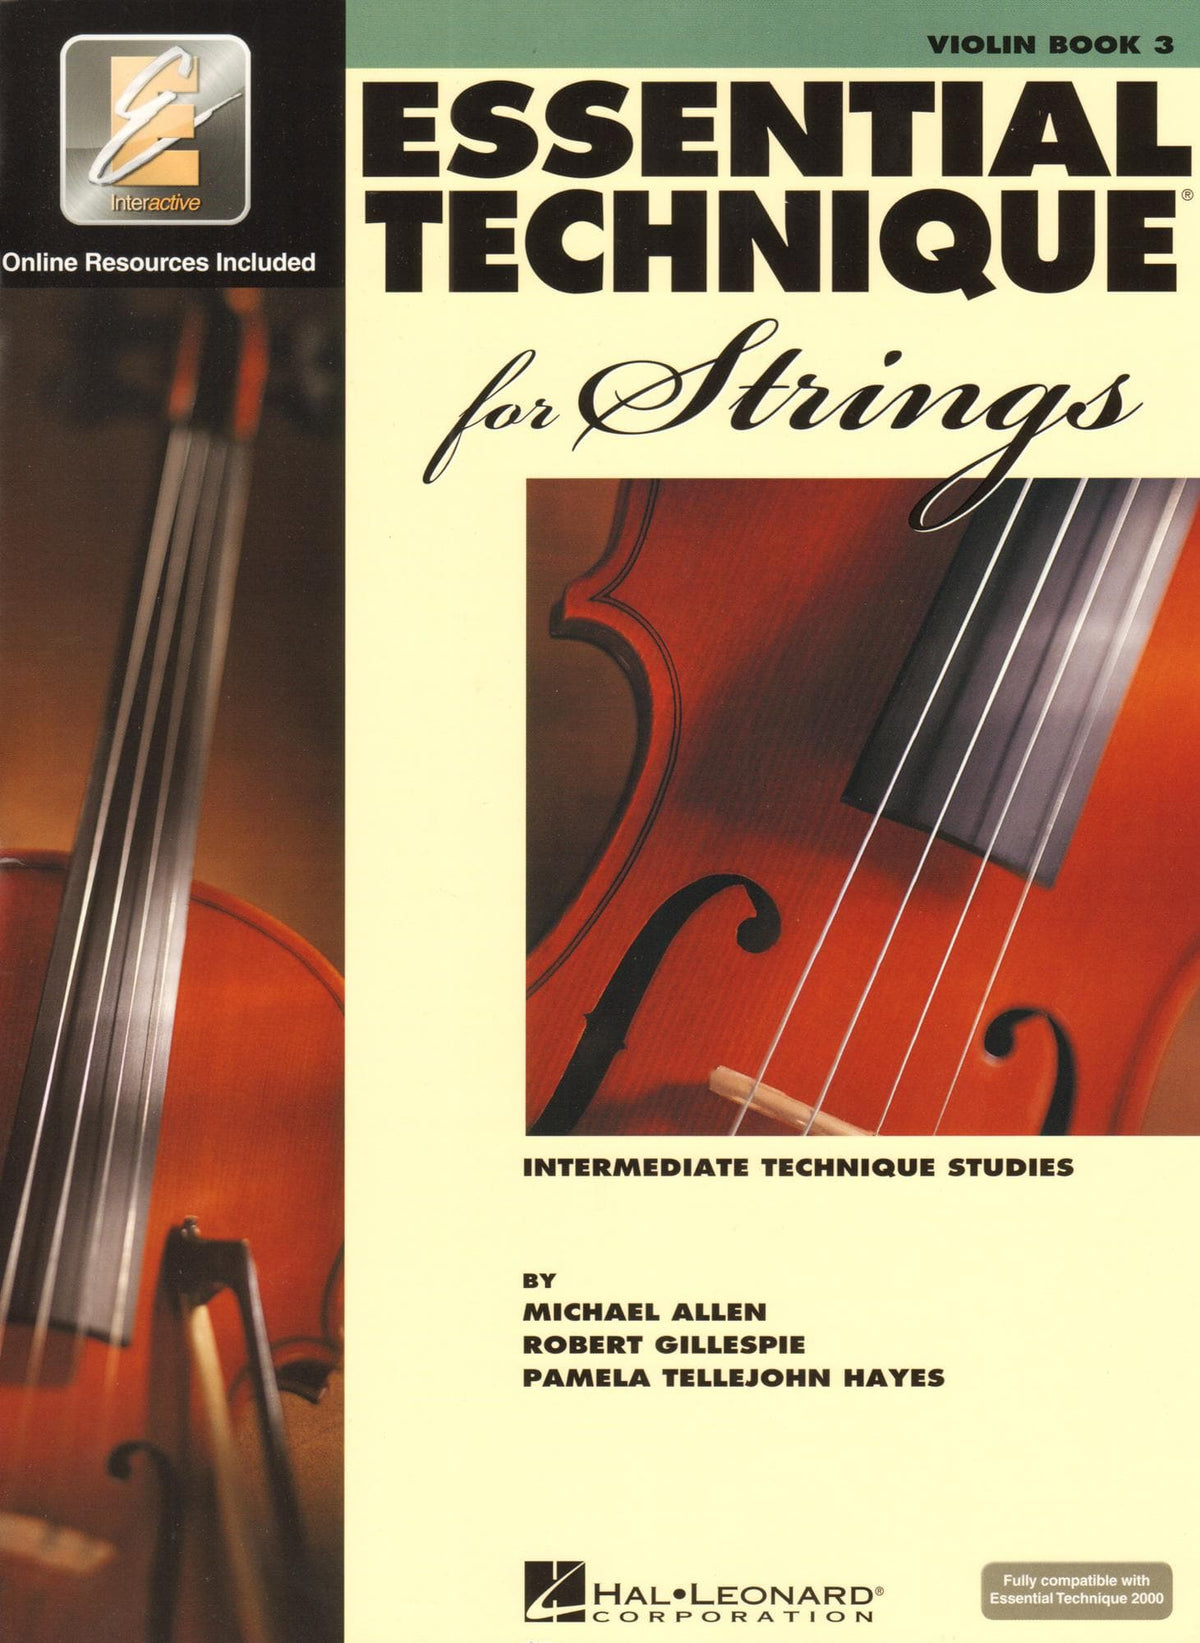 Essential Technique Interactive (formerly 2000) for Strings - Violin Book 3 - by Allen/Gillespie/Hayes - Hal Leonard Publication